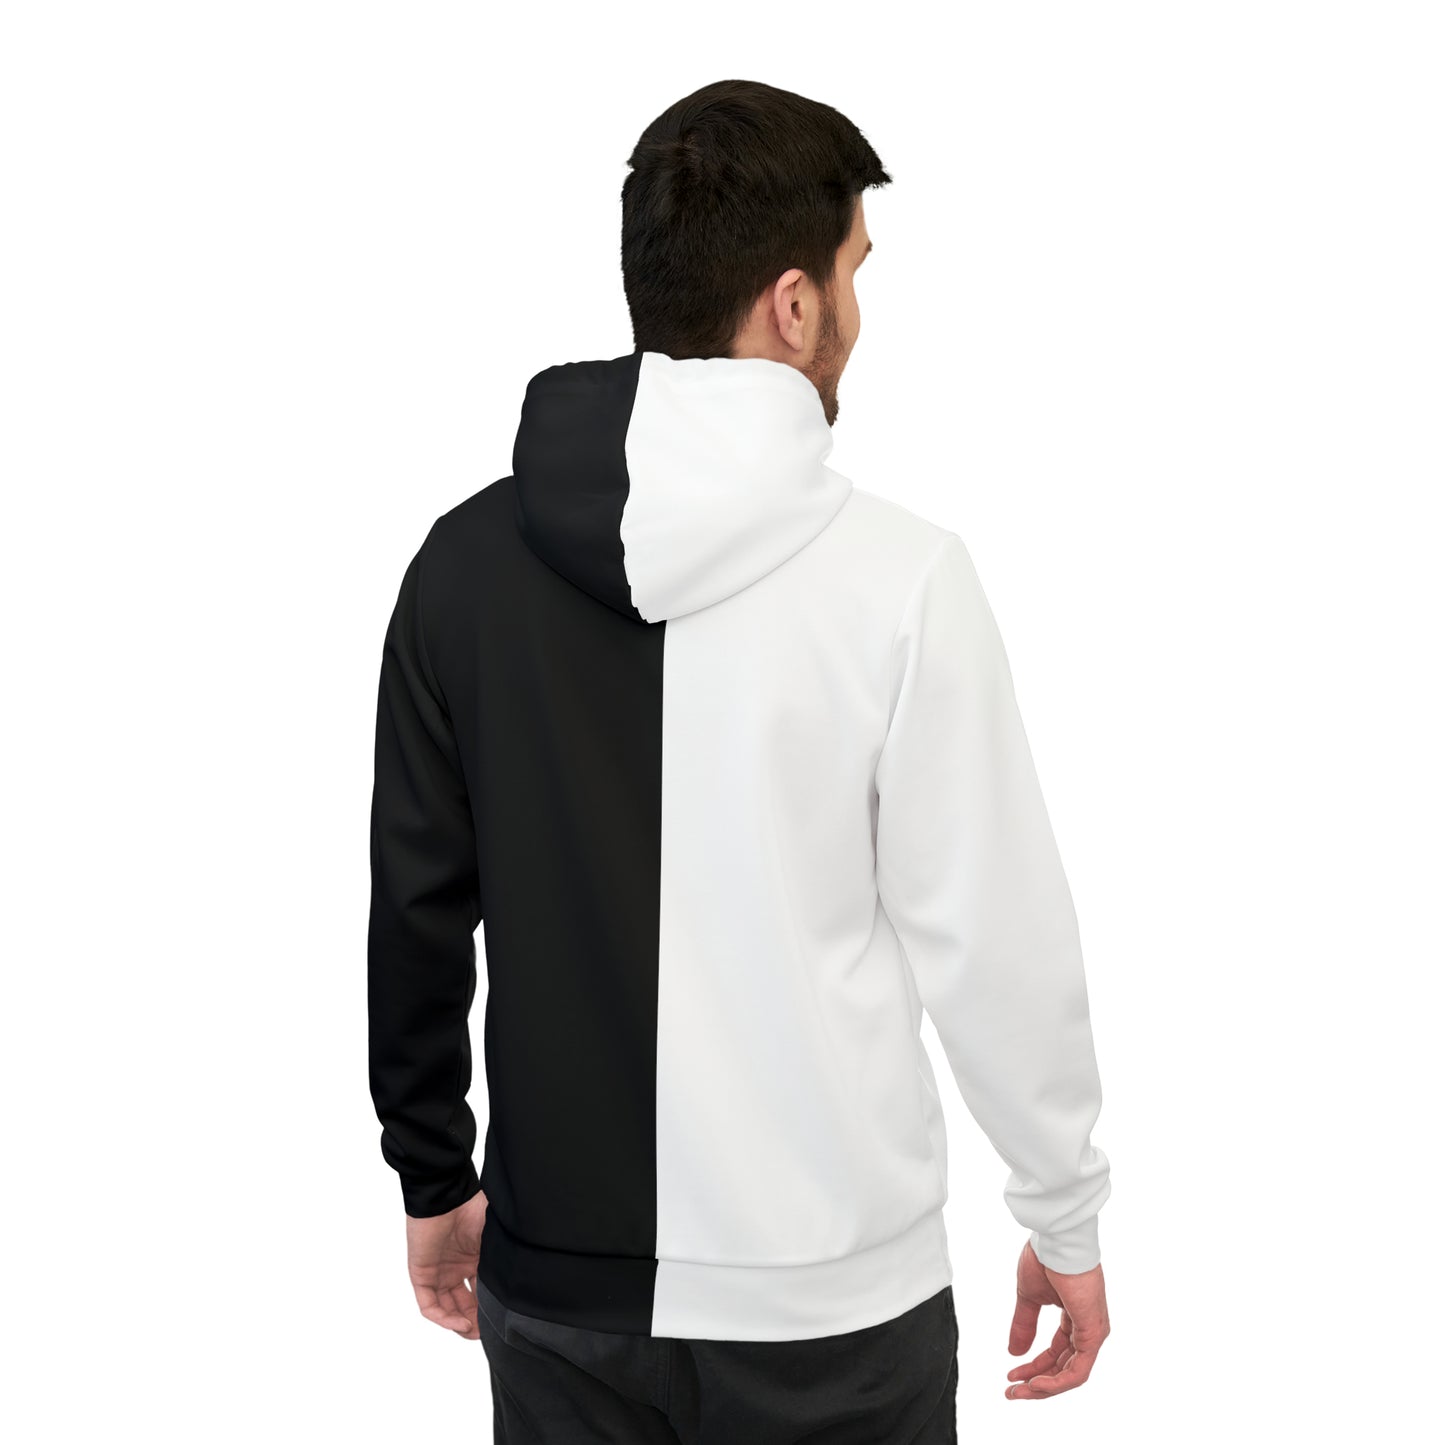 Monochrome Classic: The Timeless Black & White Hoodie